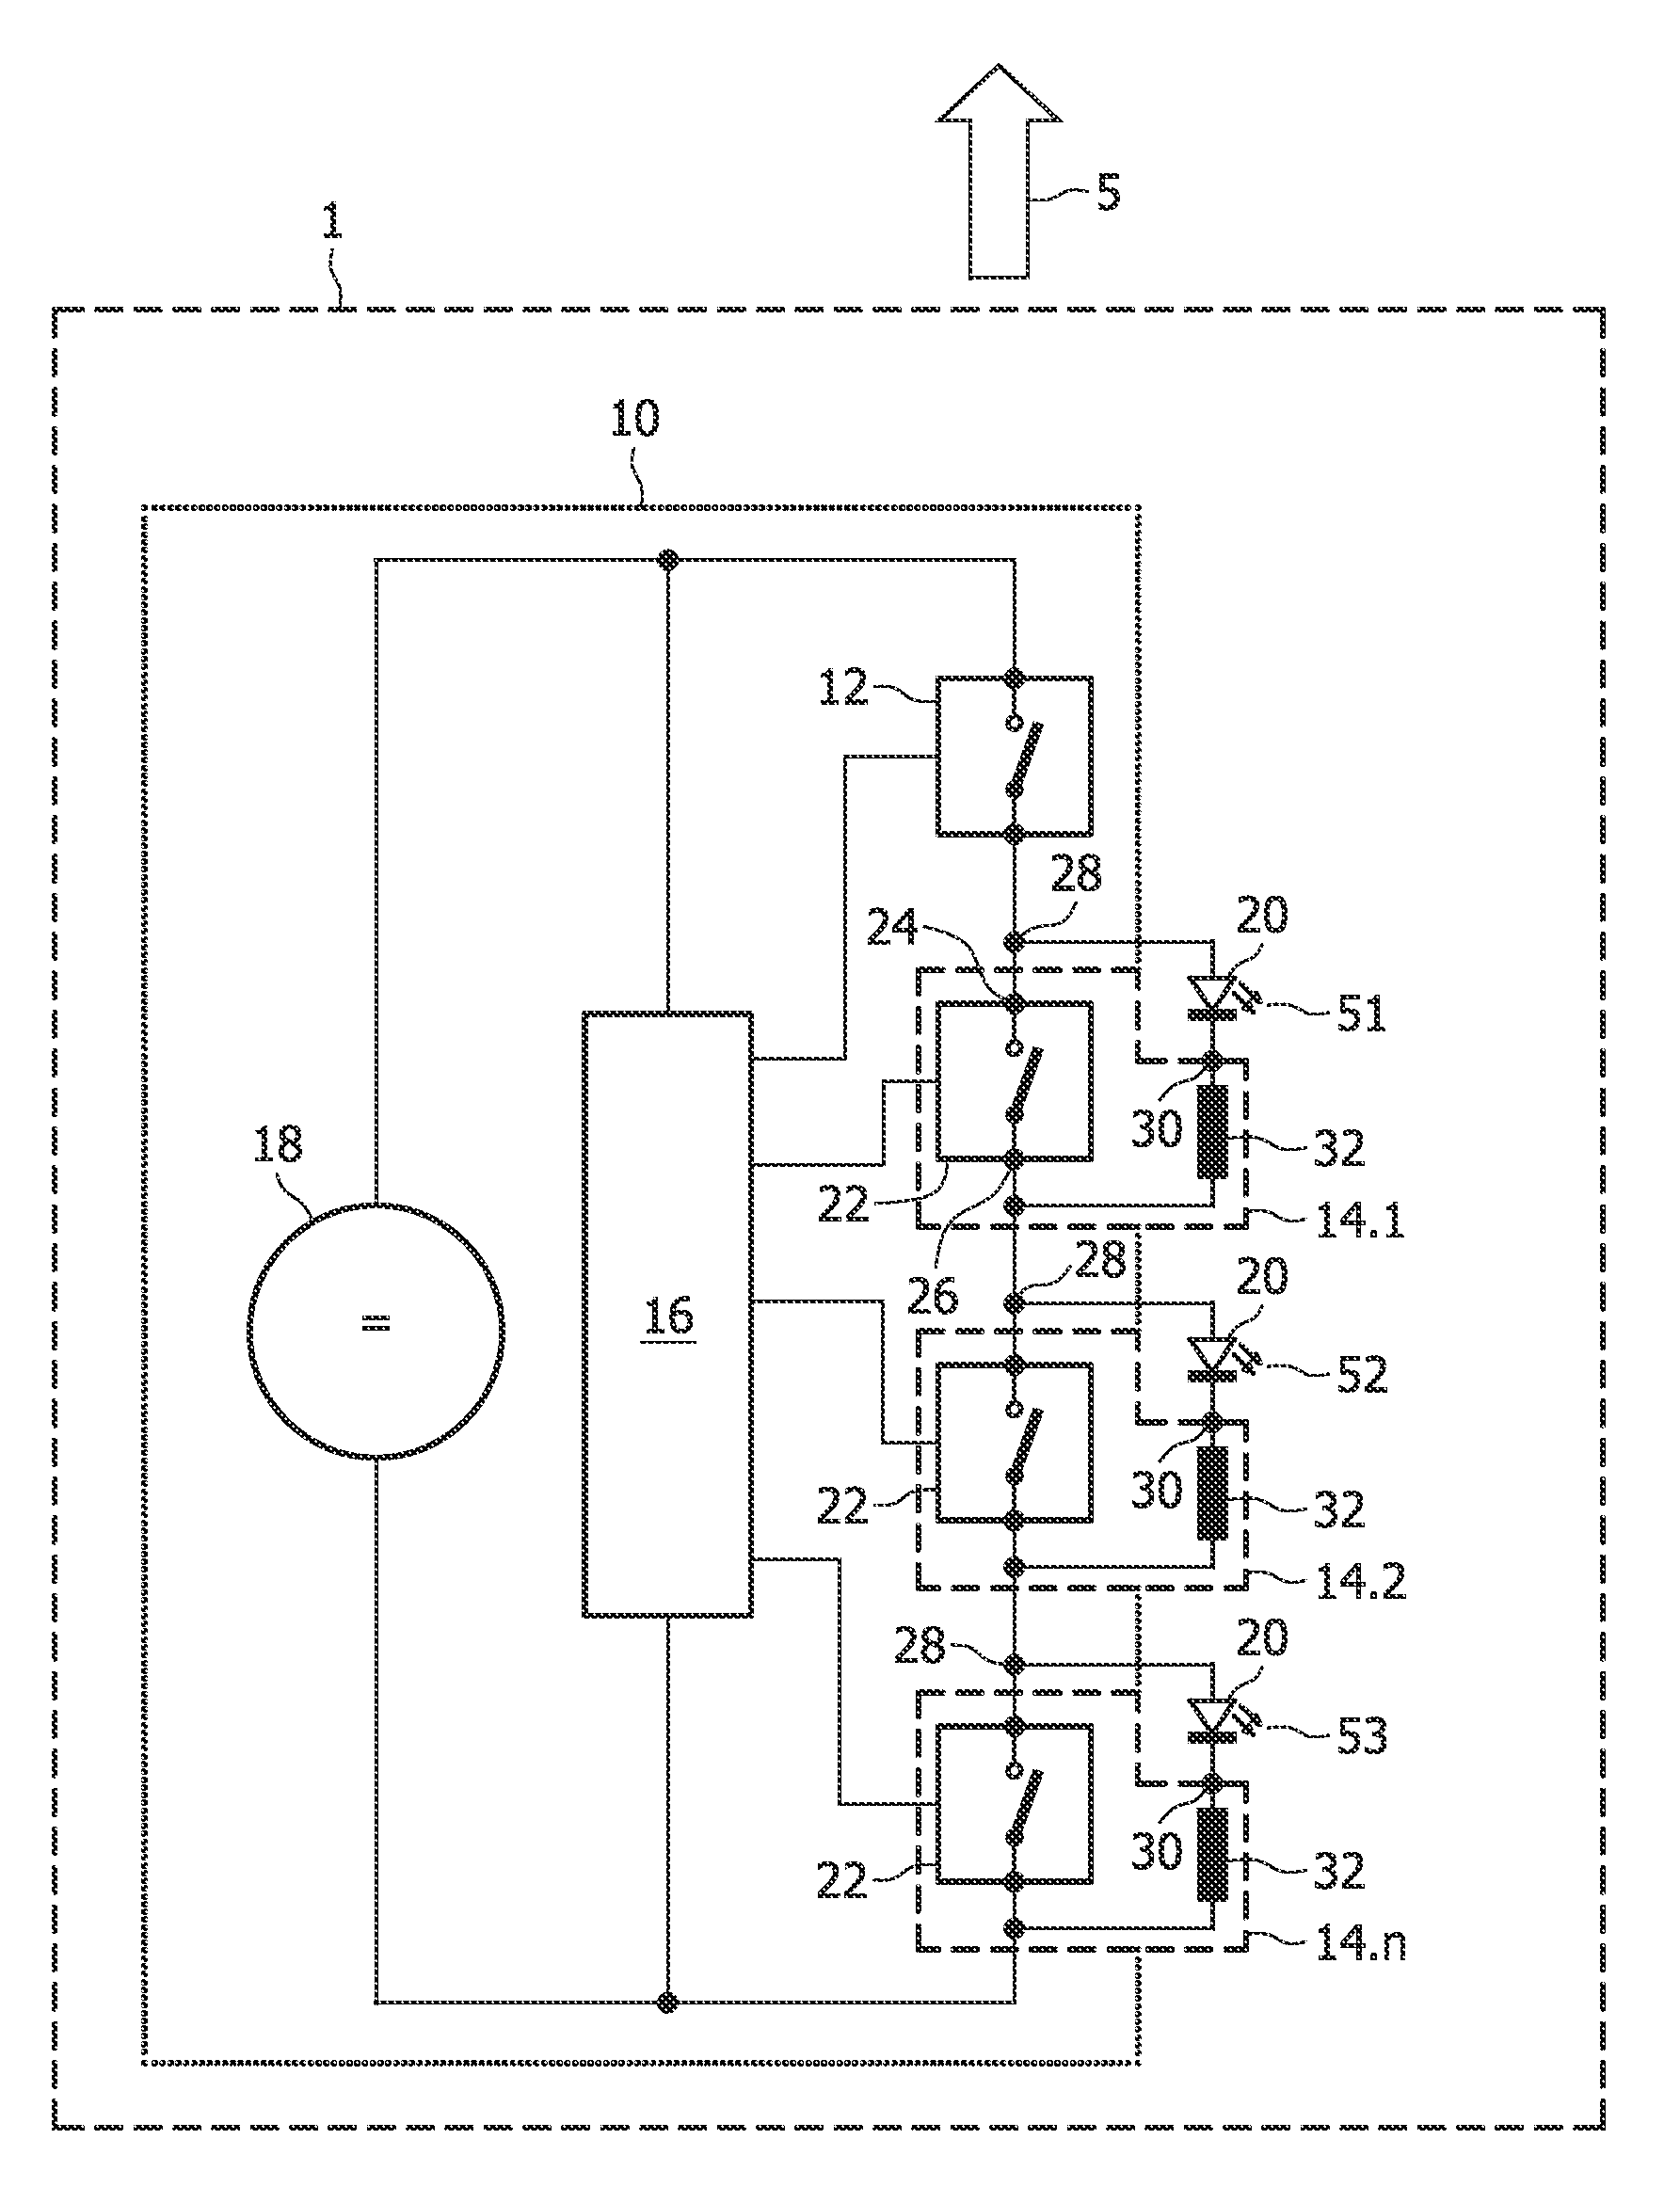 Driver device for leds